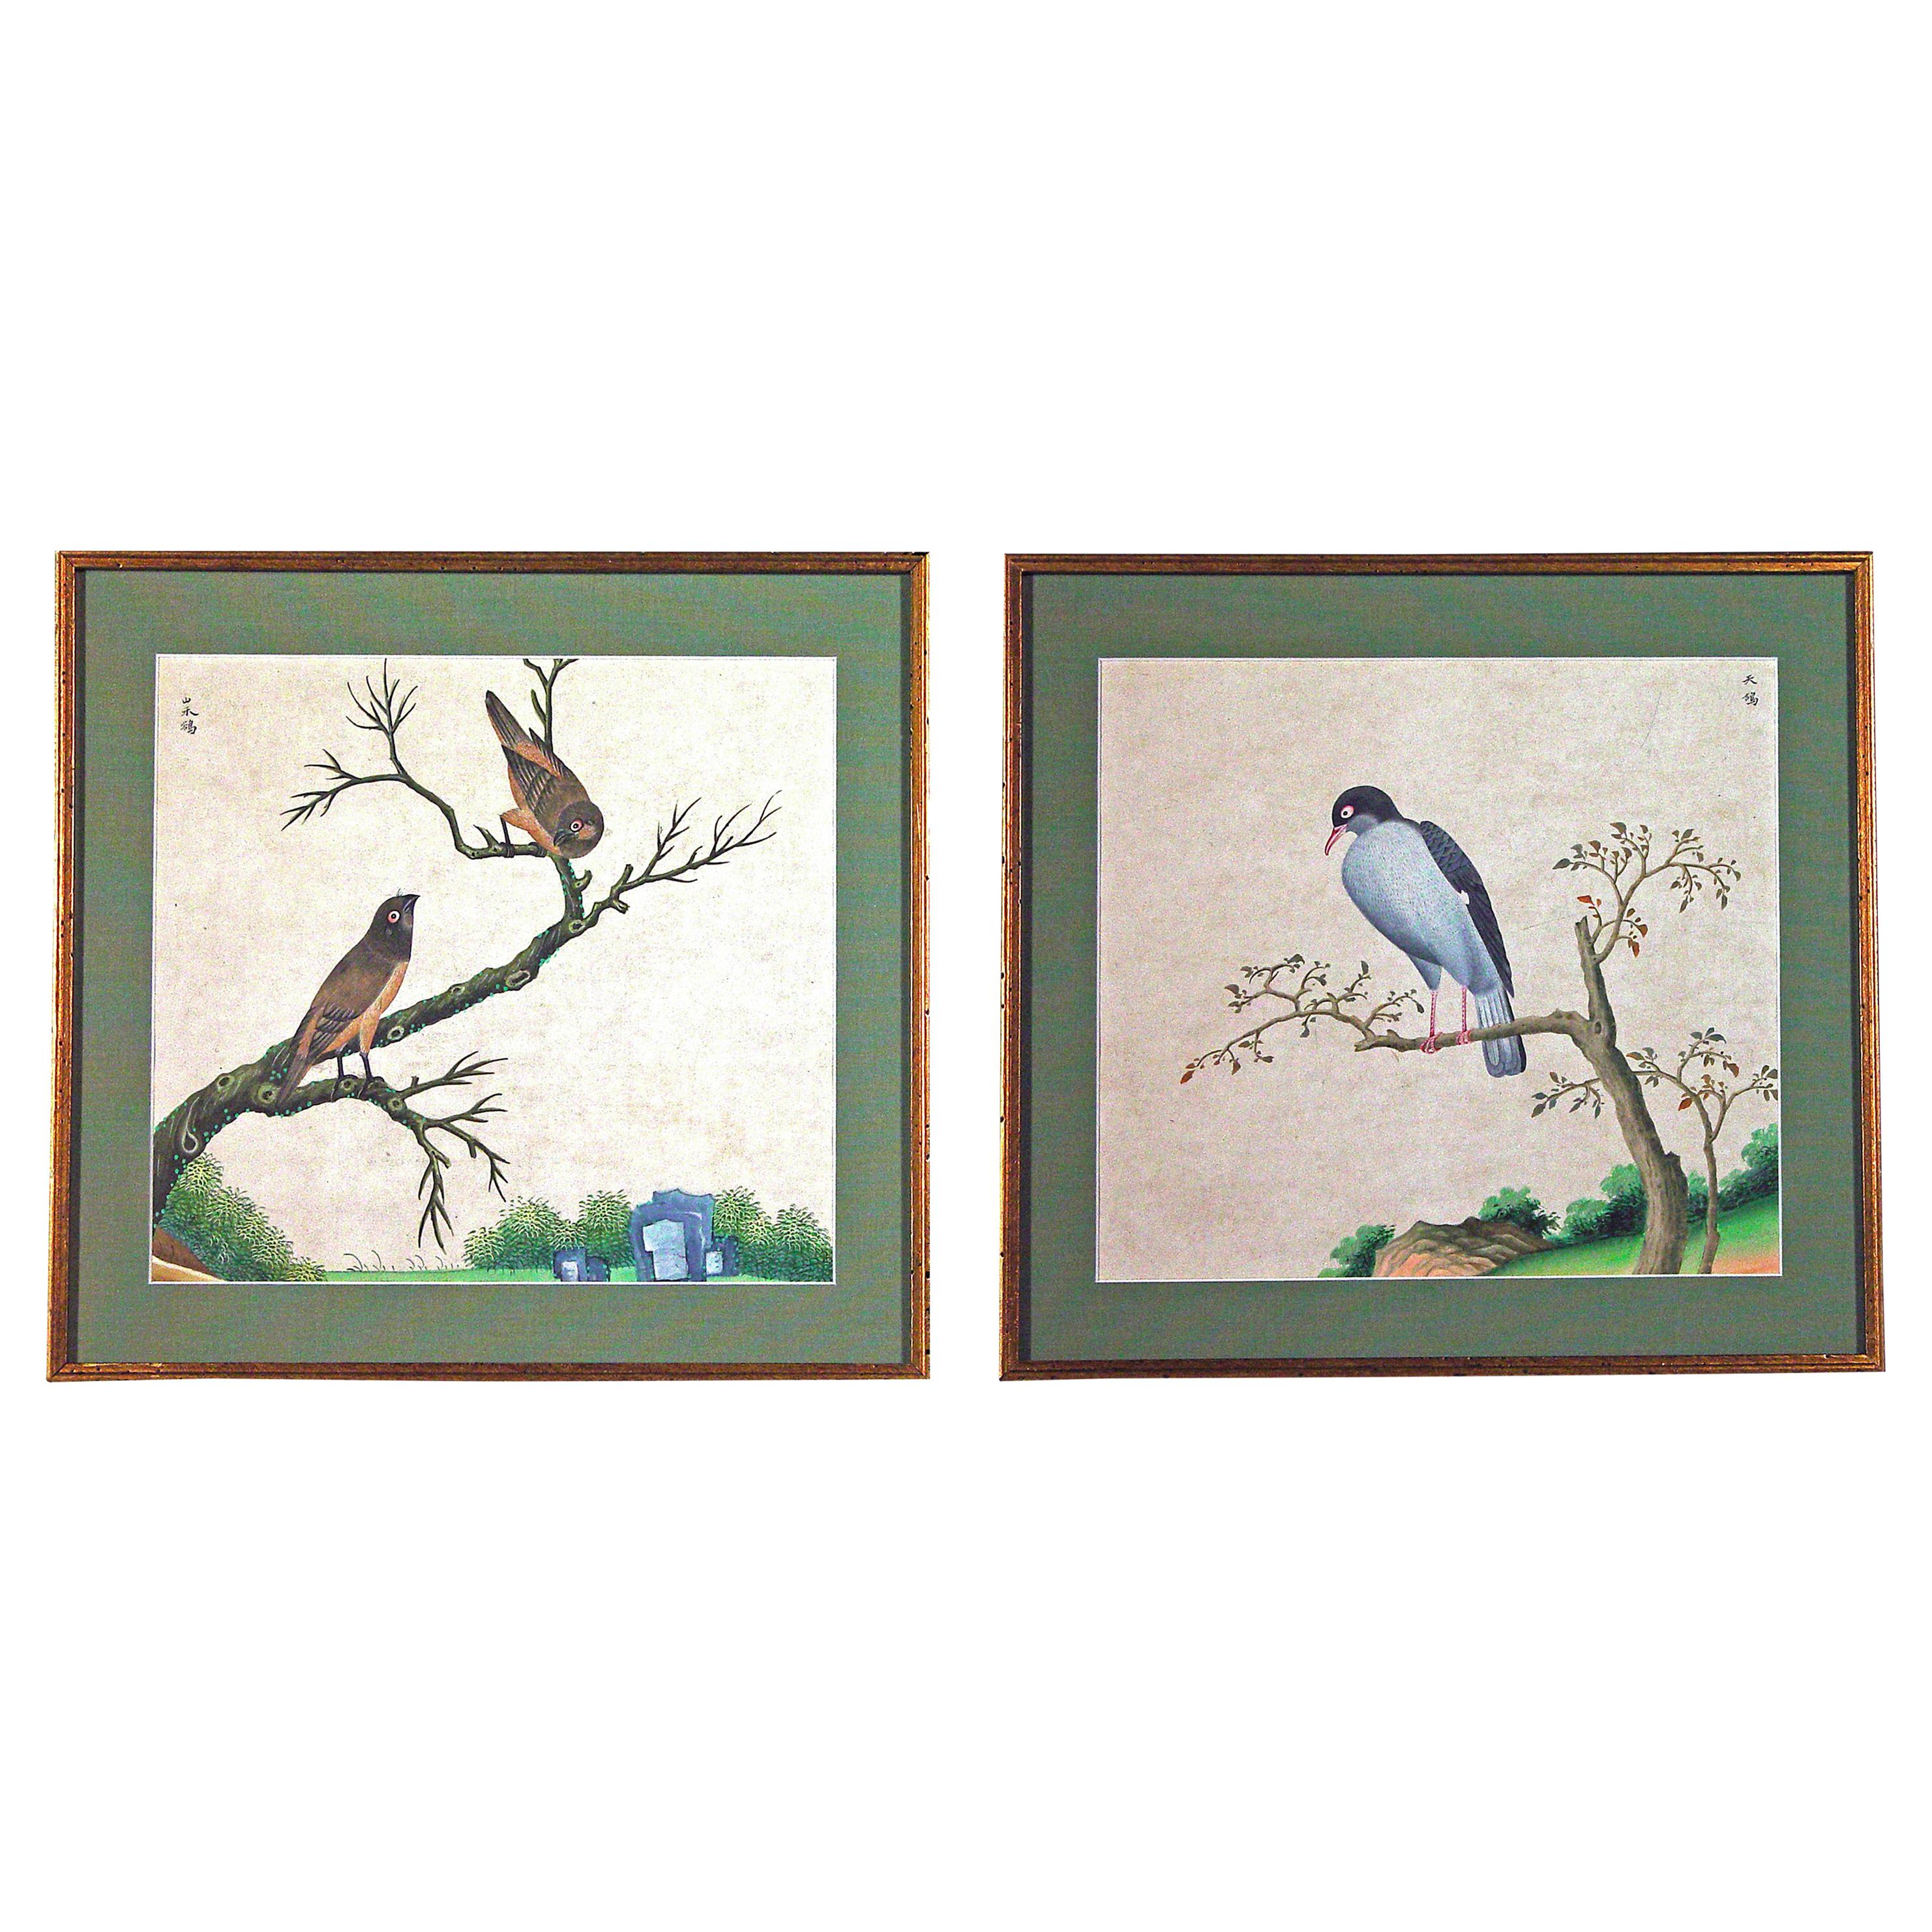 China Trade watercolor paintings of exotic birds on branches are in watercolor and gouache on Chinese paper.

One picture depicts a pigeon perched on a tree branch with a landscape background. Chinese calligraphy can be seen in the top right